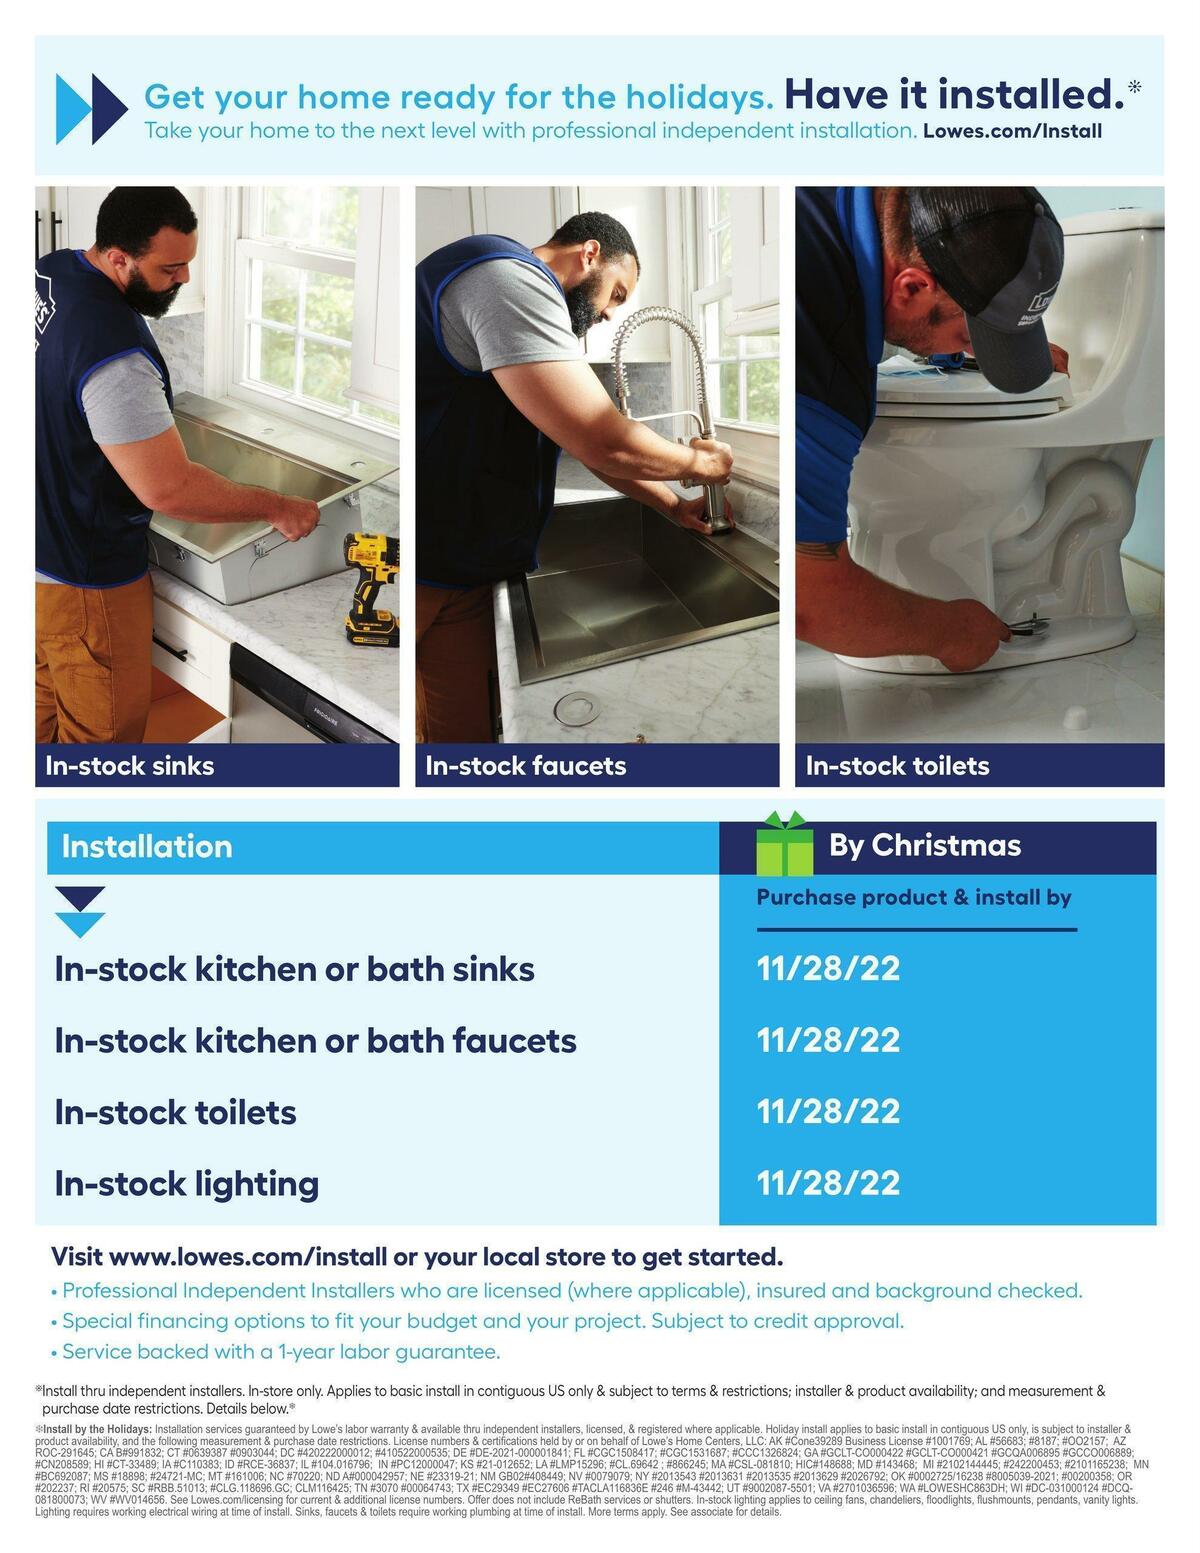 Lowe's Weekly Ad from November 17